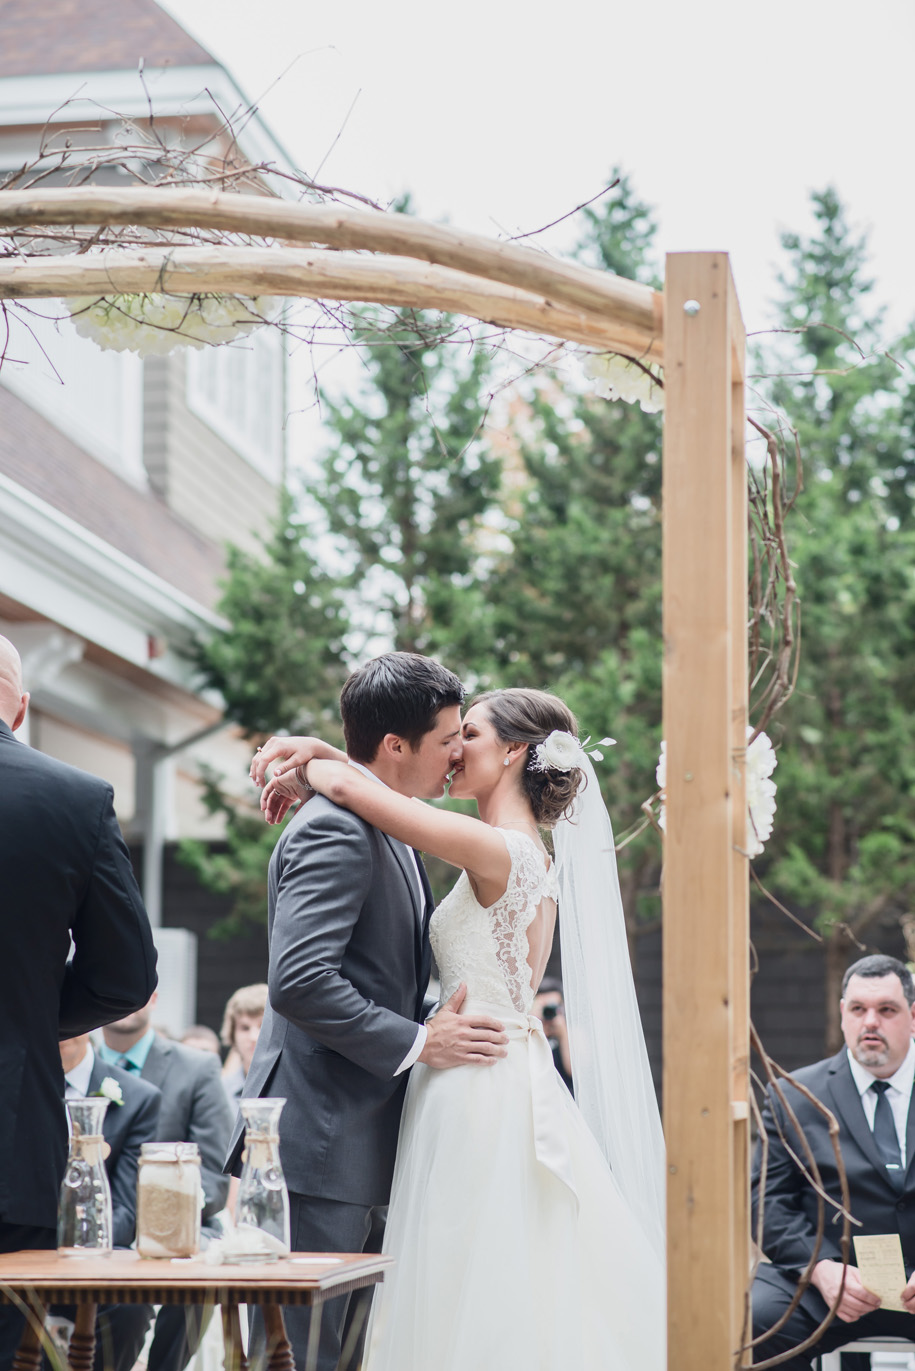 Rustic twig and branch arbor for a rustic elegant outdoor ceremony in the woods l Lace wedding dress and tulle skirt l Tuxedo l Bow tie l First Kiss